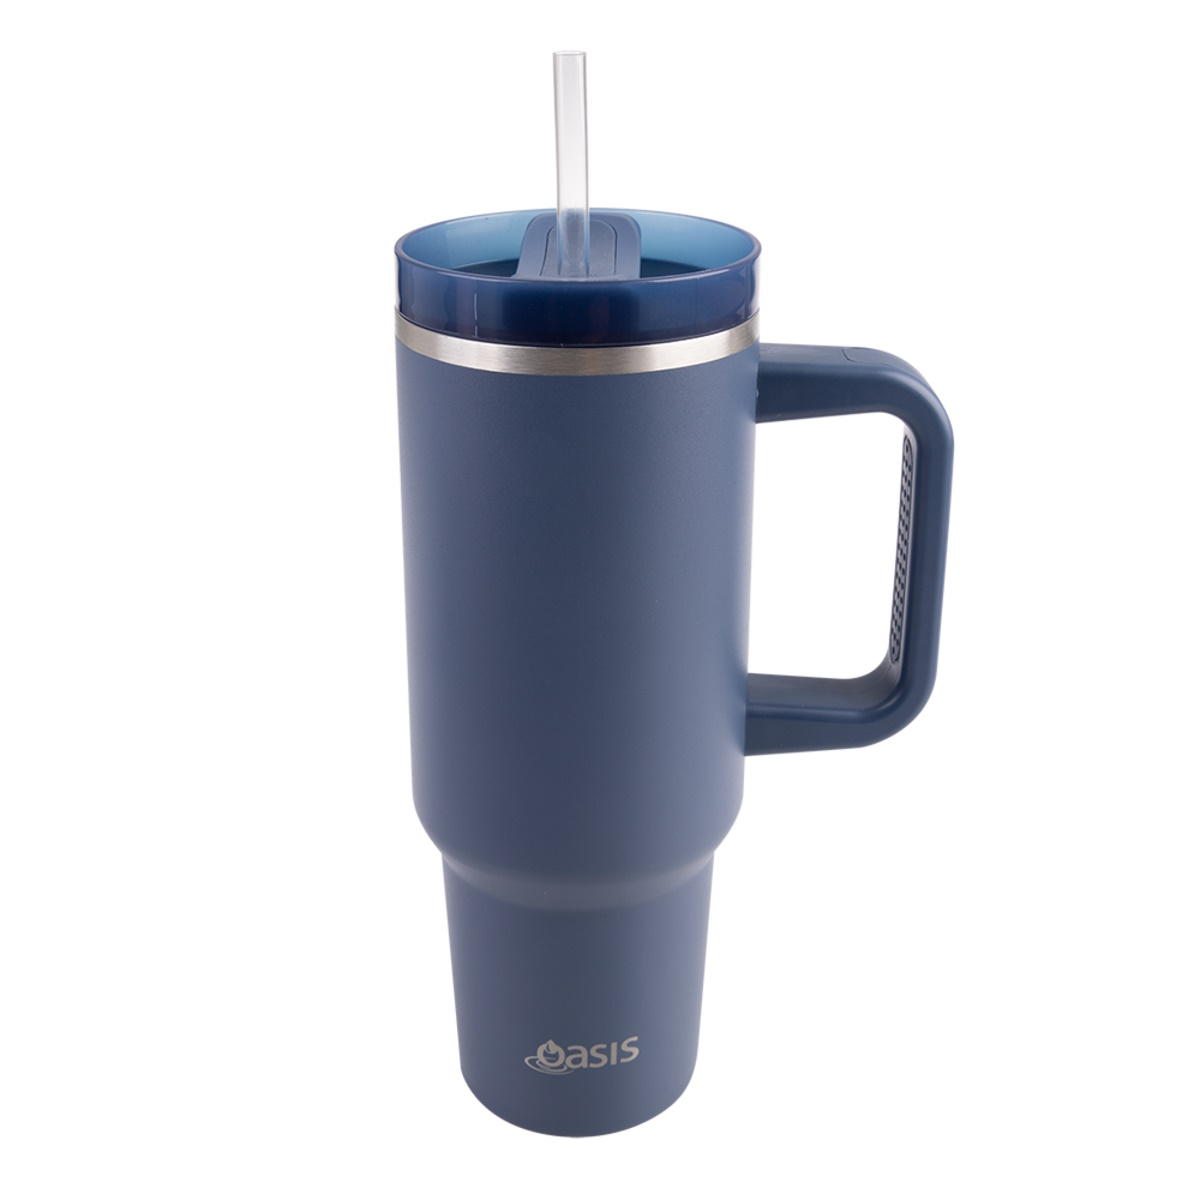  Oasis Stainless Steel Double Wall Insulated Commuter Travel Tumbler 1.2l - Indigo